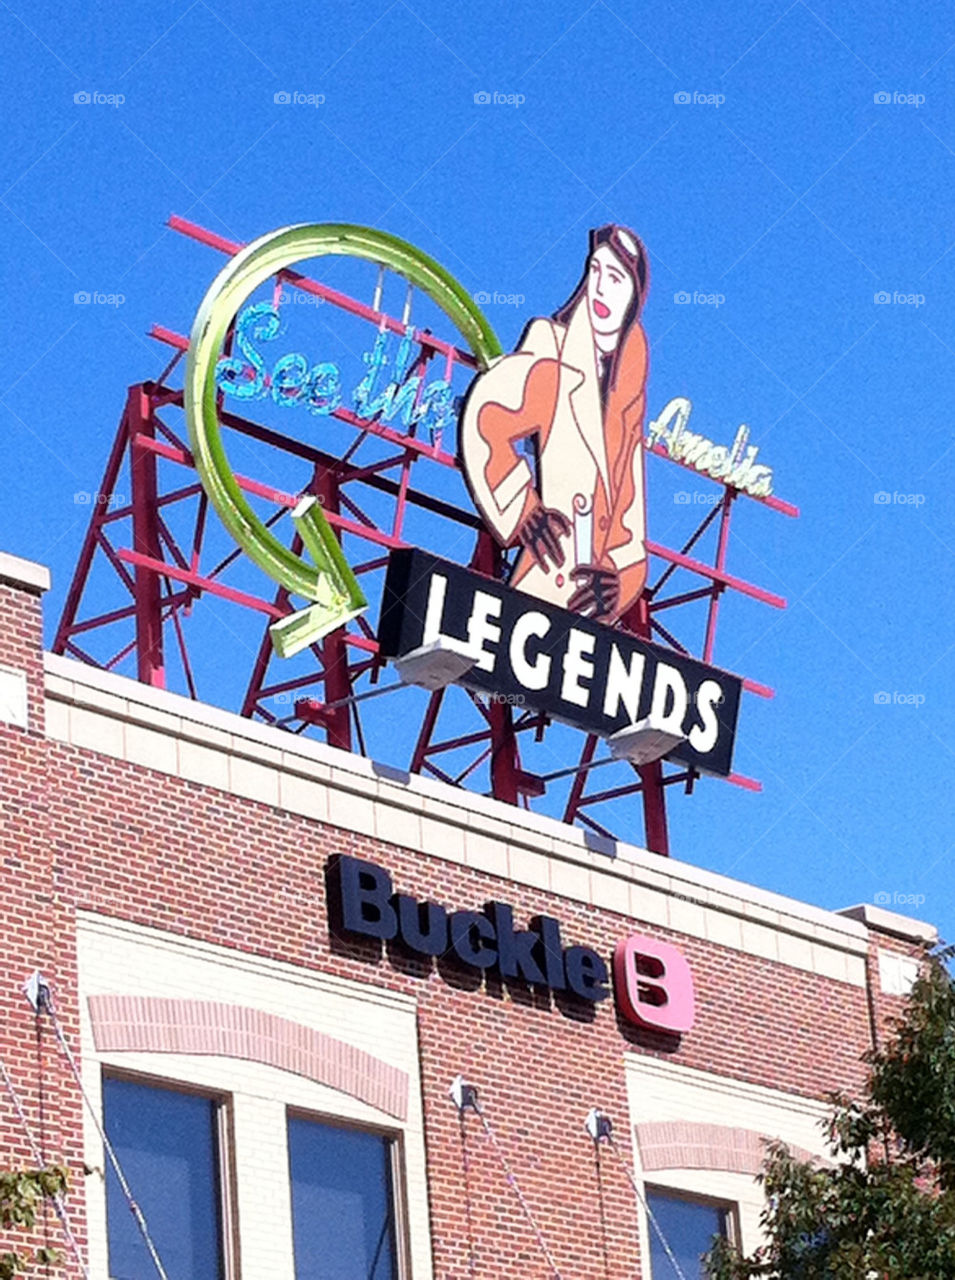 Signage from the Legends Shopping Center in Kansas City, Kansas.